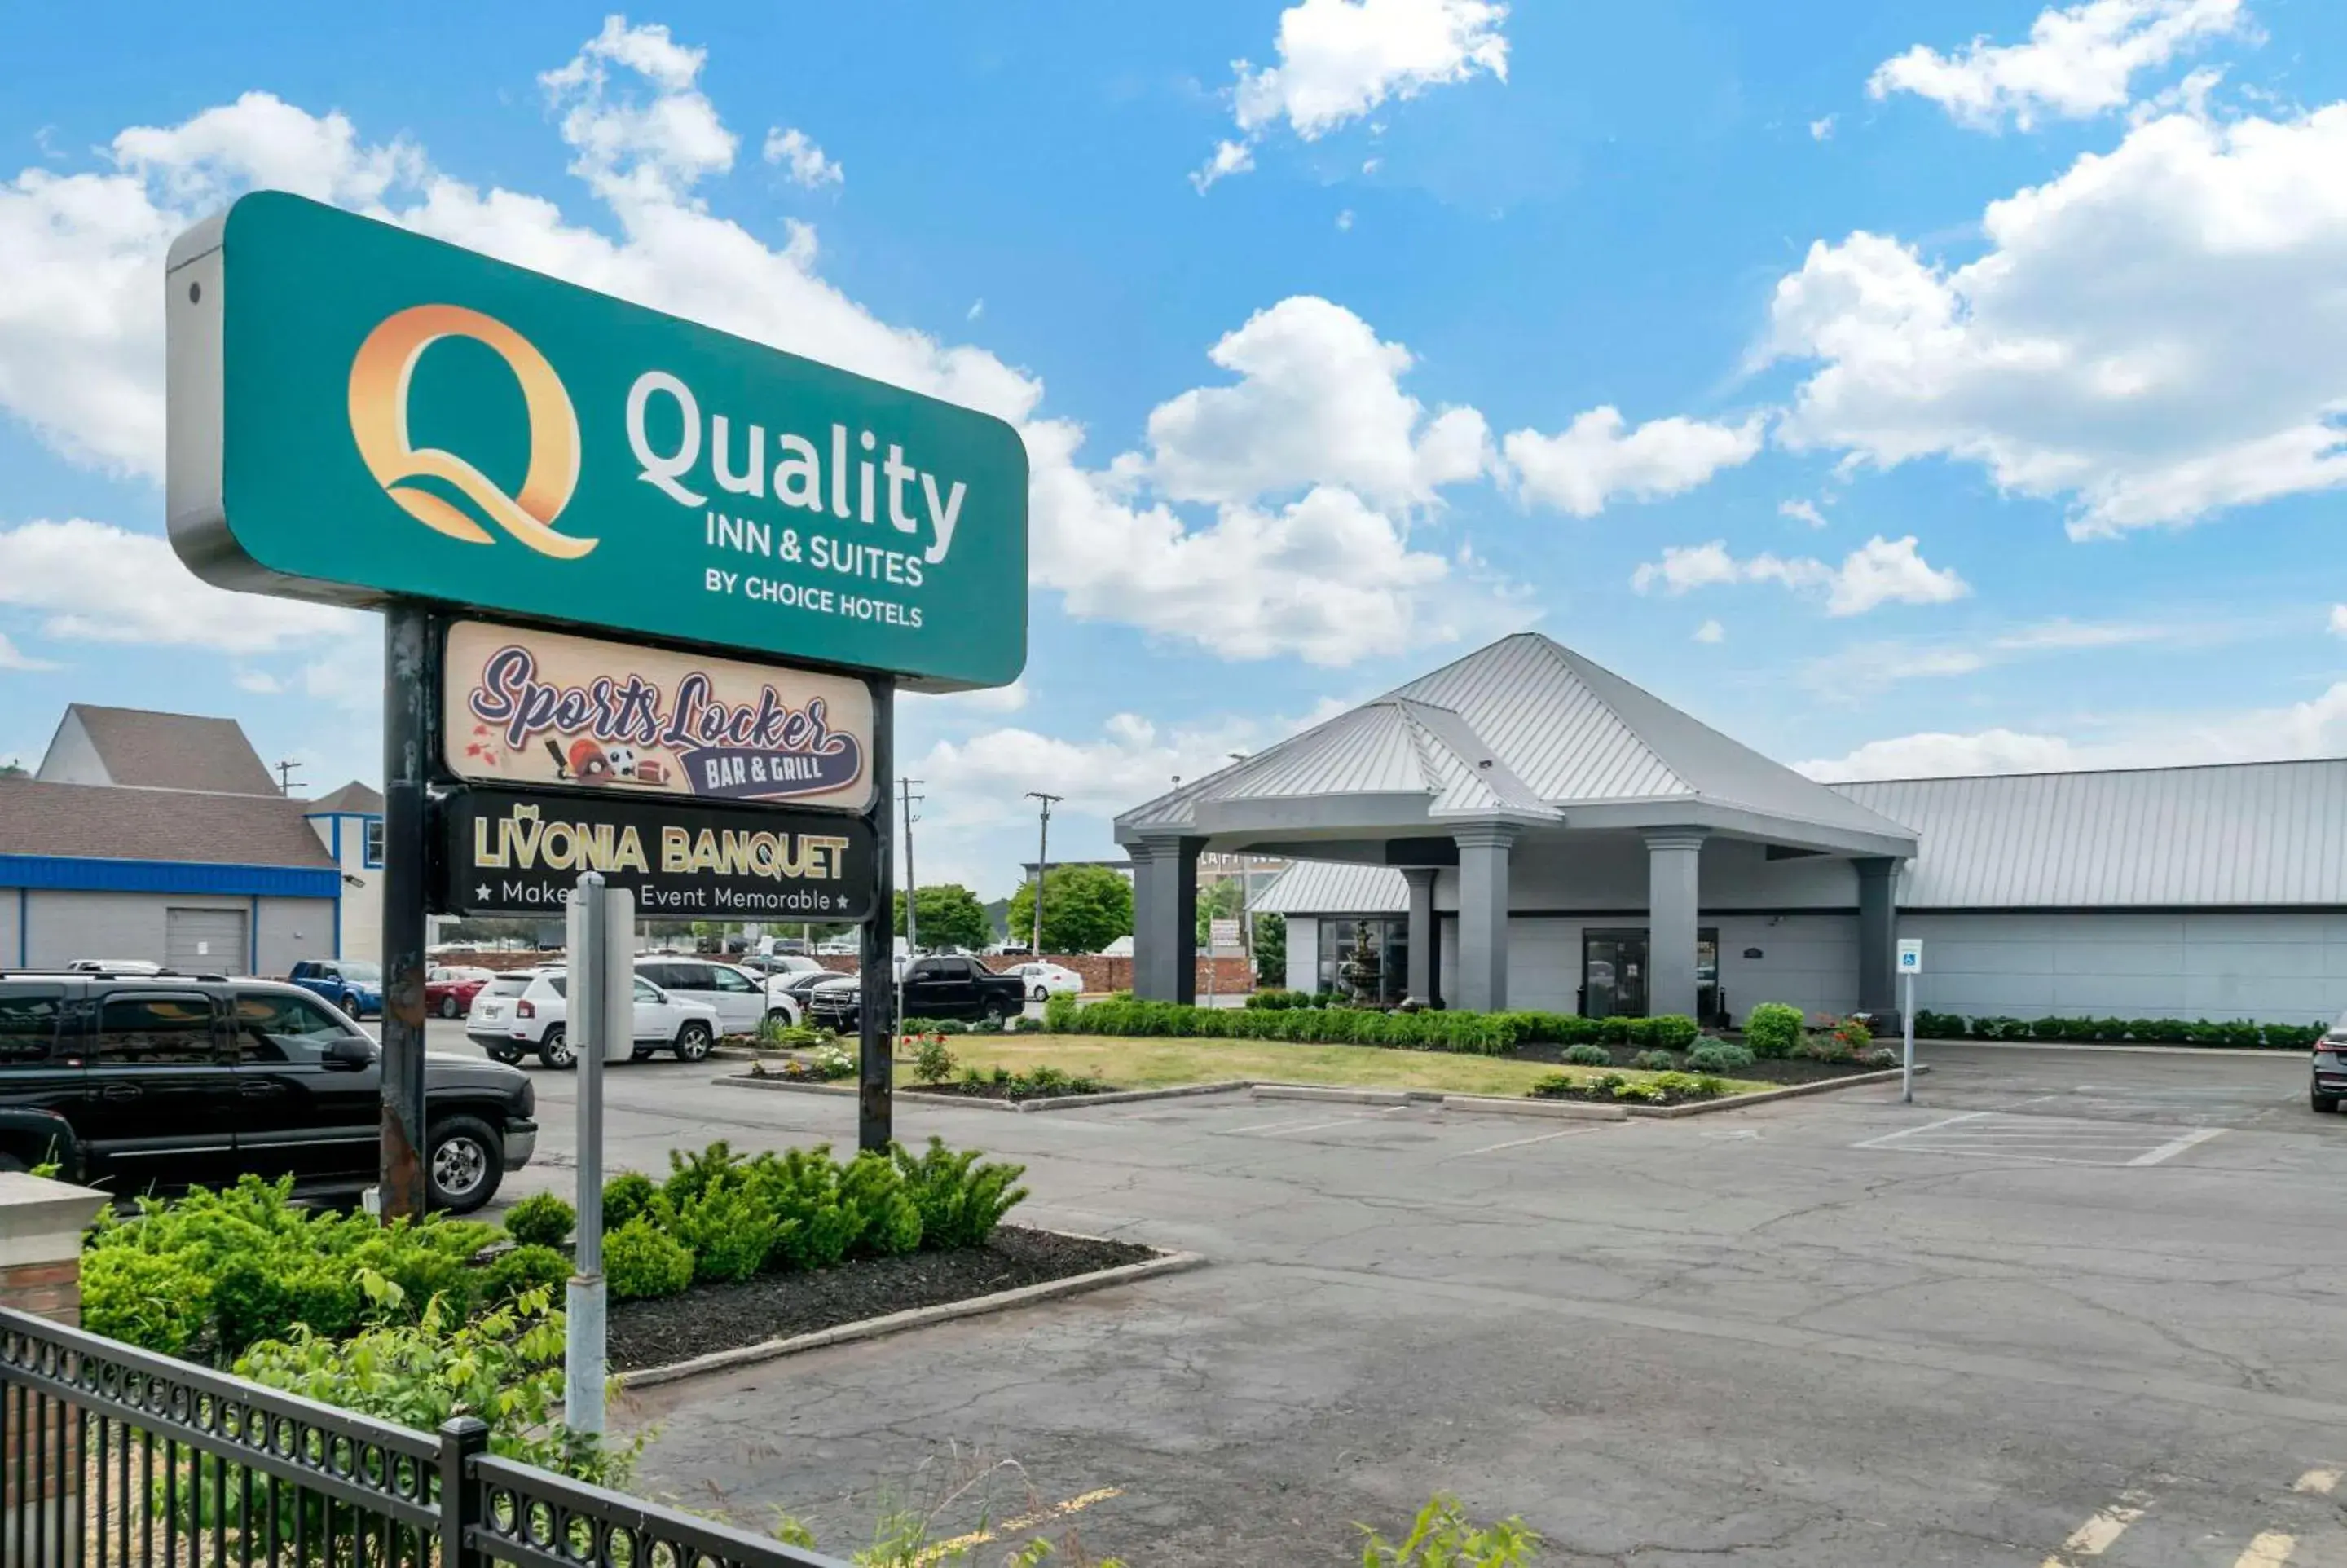 Property Building in Quality Inn & Suites Banquet Center